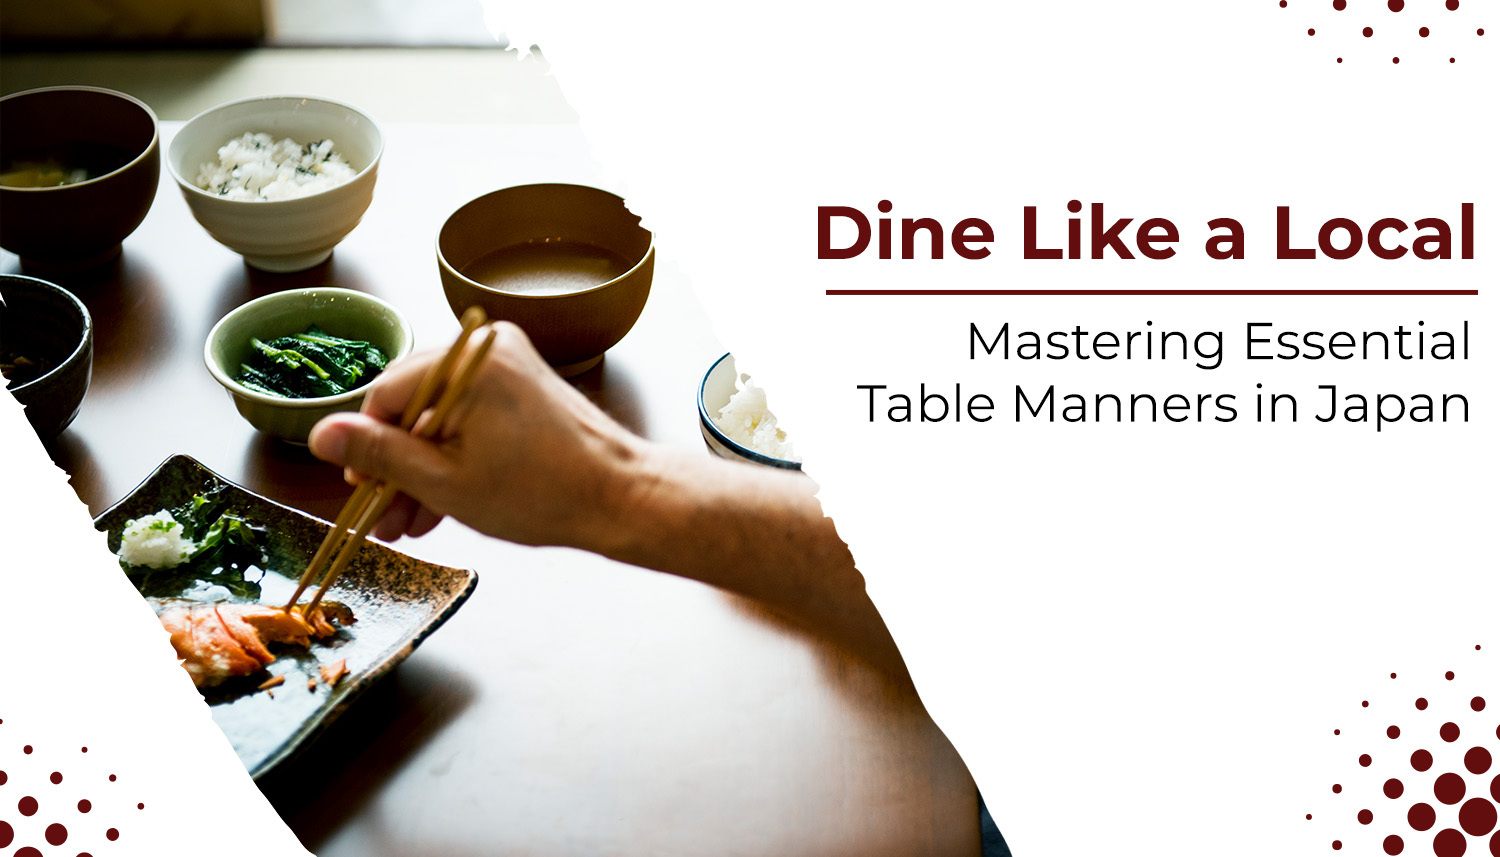 Table Manners In Japanese: How To Dine Like A Local?